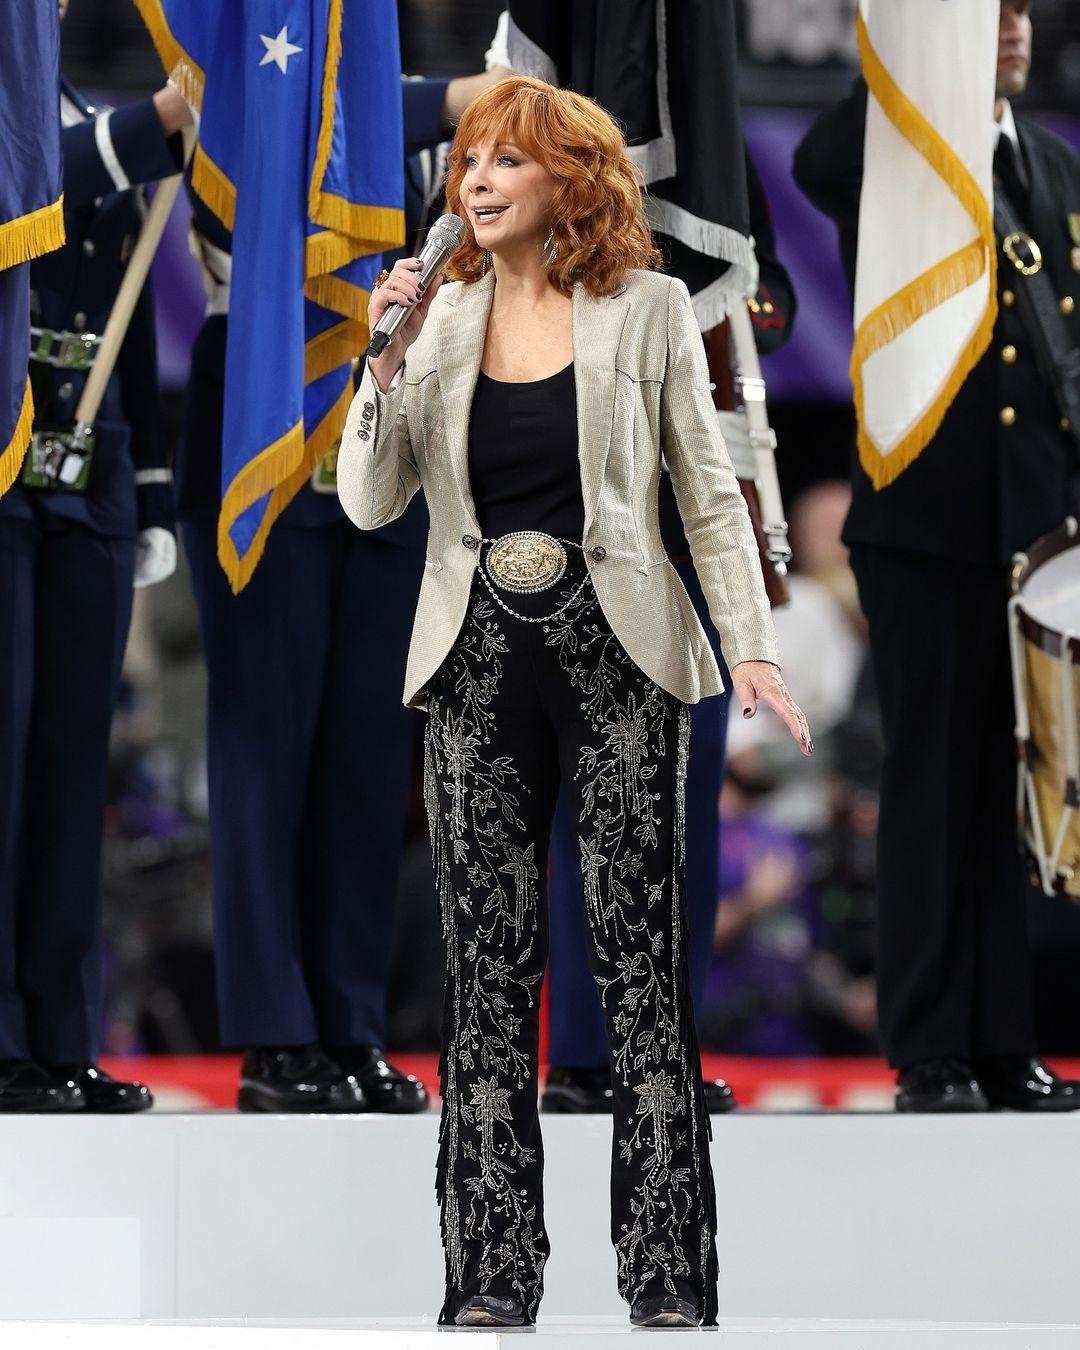 #Reba in custom #RalphLauren for the #SuperBowlLVIII national anthem performance at Allegiant Stadium in Las Vegas, NV. 

The custom look featured hand-embroidered bootcut trousers finished with suede and crystal-beaded fringe along the seams. To finish the look, the singer and actor wore a Western-inspired platinum lamé blazer that sparkled with more than 175,800 Swarovski crystals.